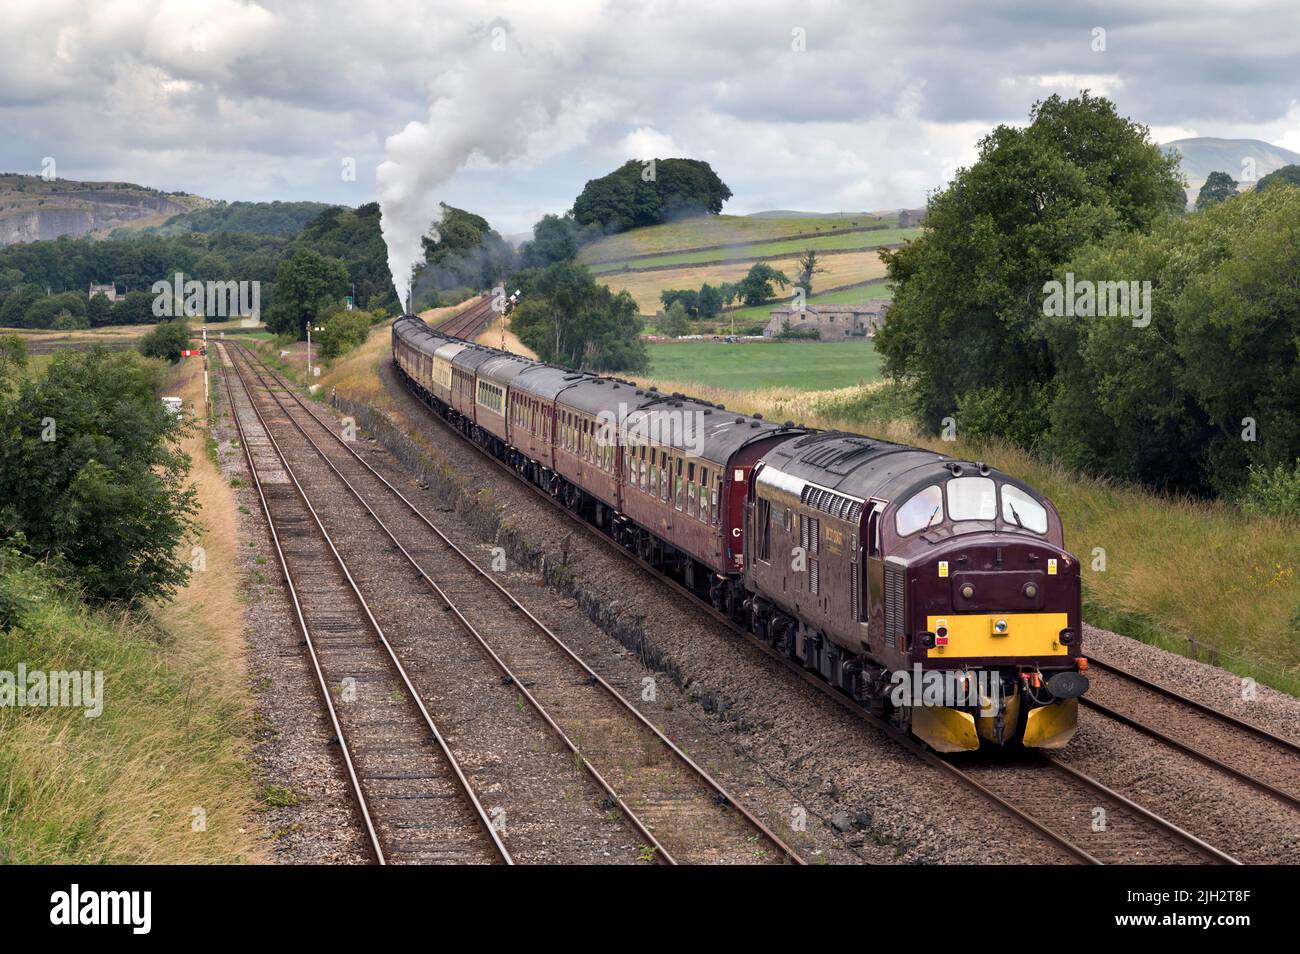 The Dalesman steam special at Settle Junction, heading for Carlisle. The steam loco is seen starting the climb, assisted by a diesel loco on the rear. Stock Photo